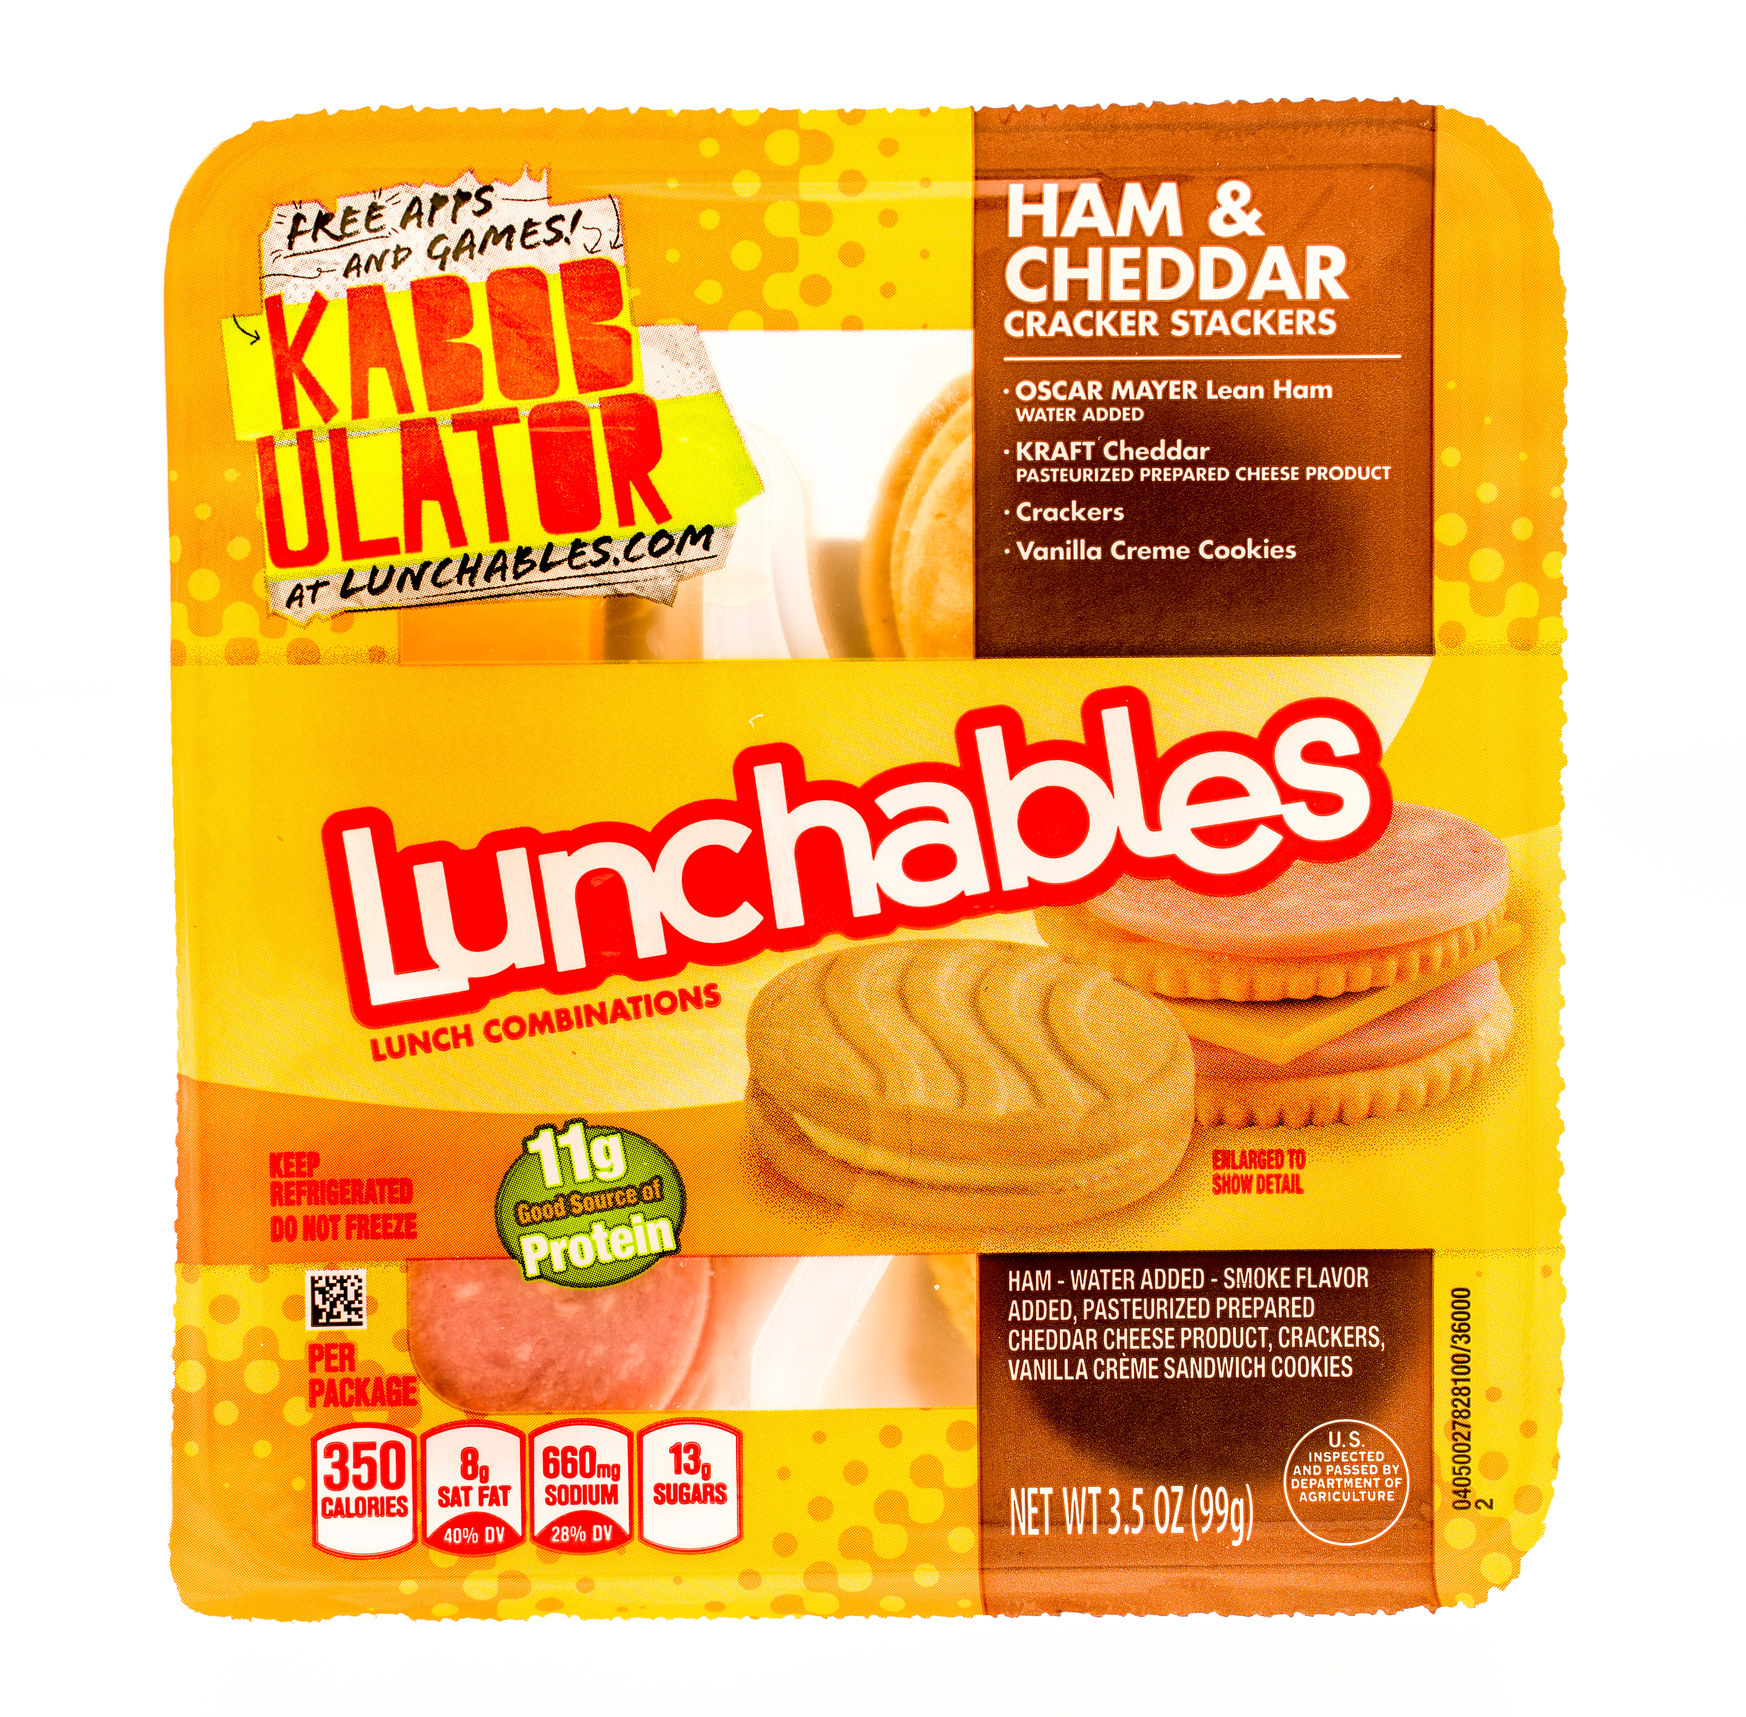 A package of Lunchables.